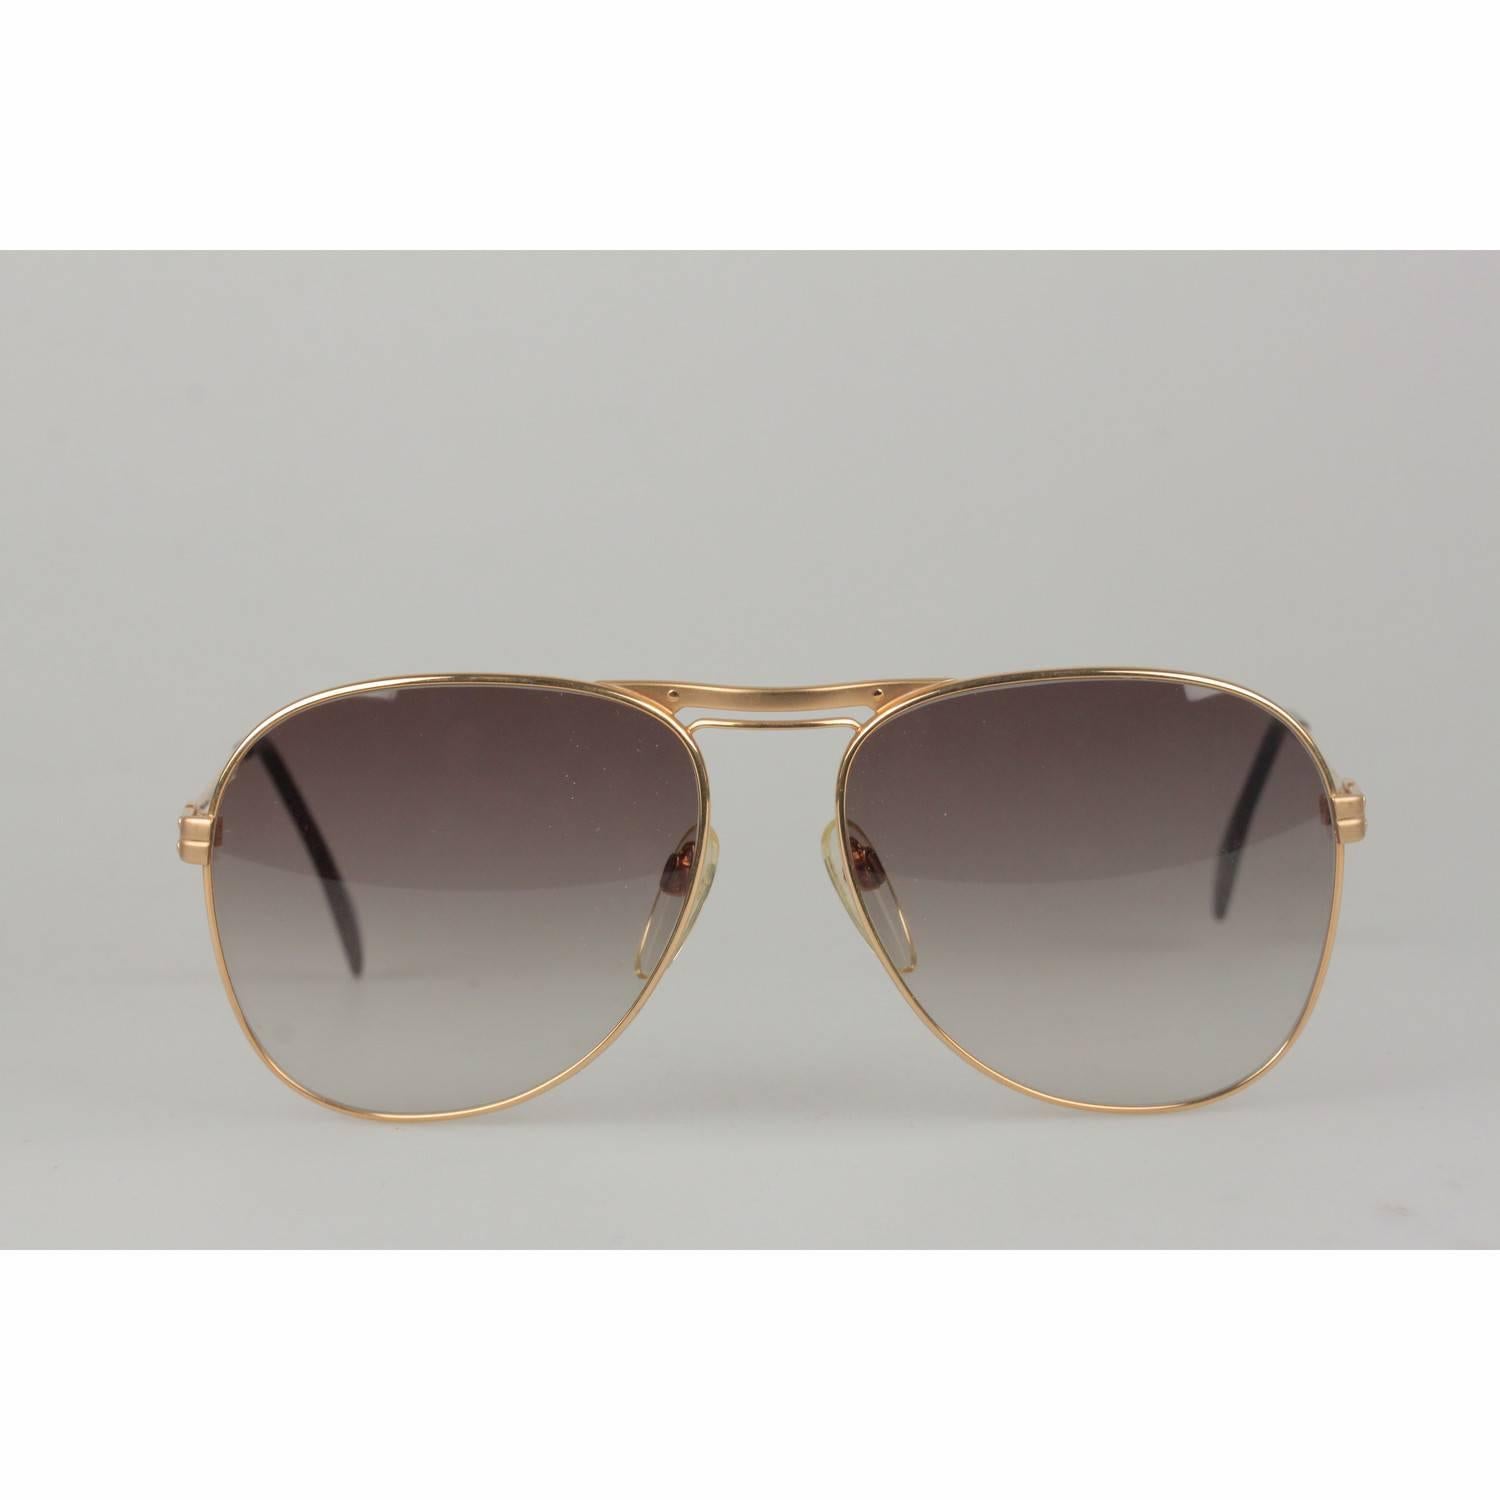 Silhouette Vintage Aviator Gold Metal Sunglasses M7019 58/16 135 mm For Sale 8